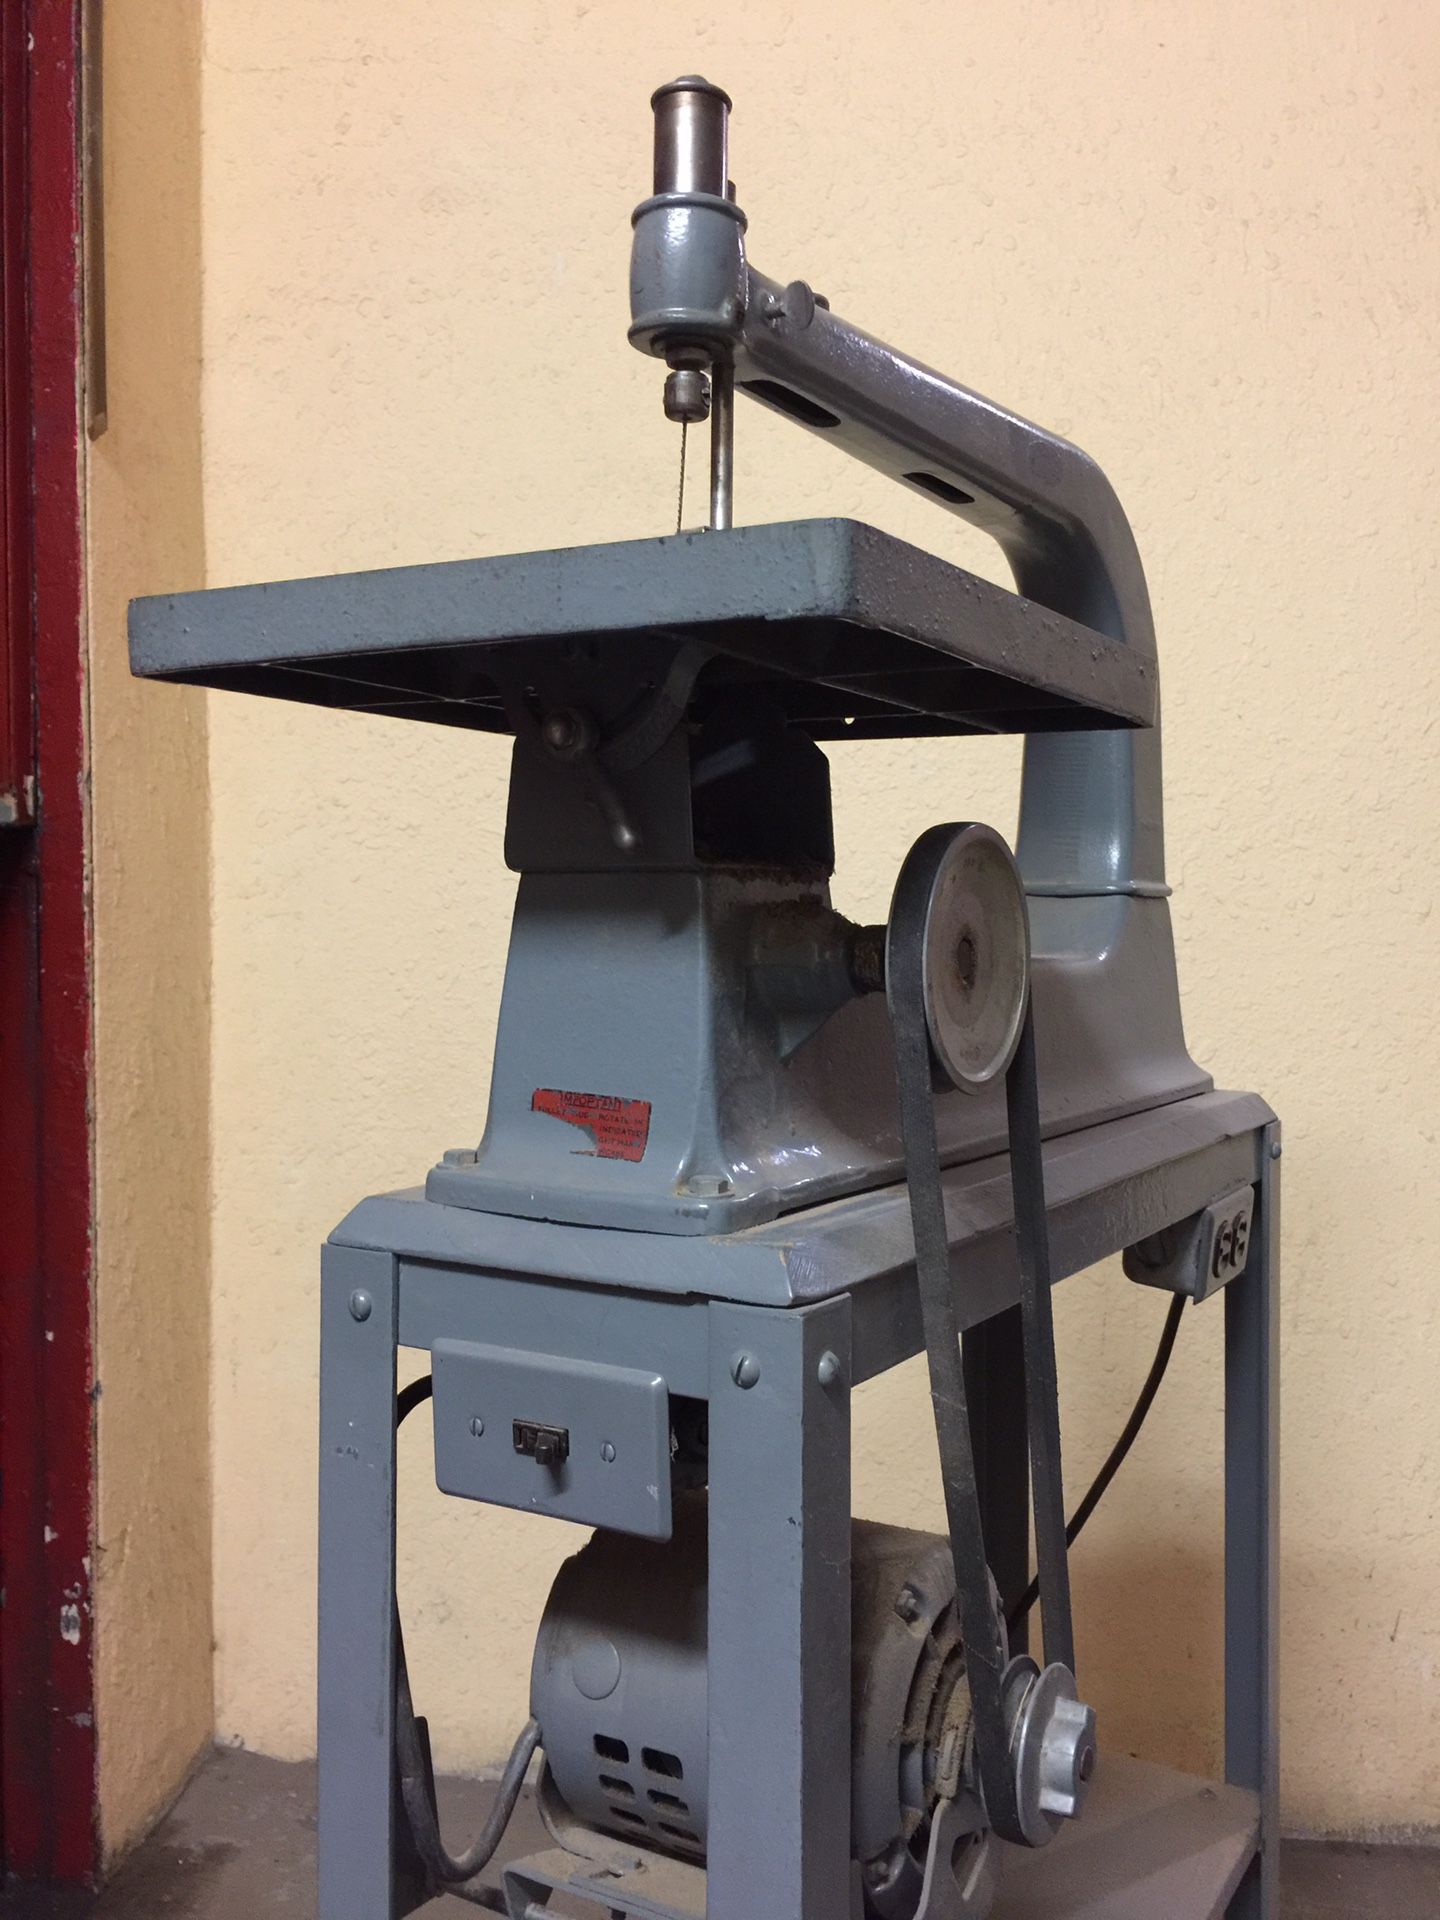 Sears vintage scroll saw. Woodworking tool. 103.0407